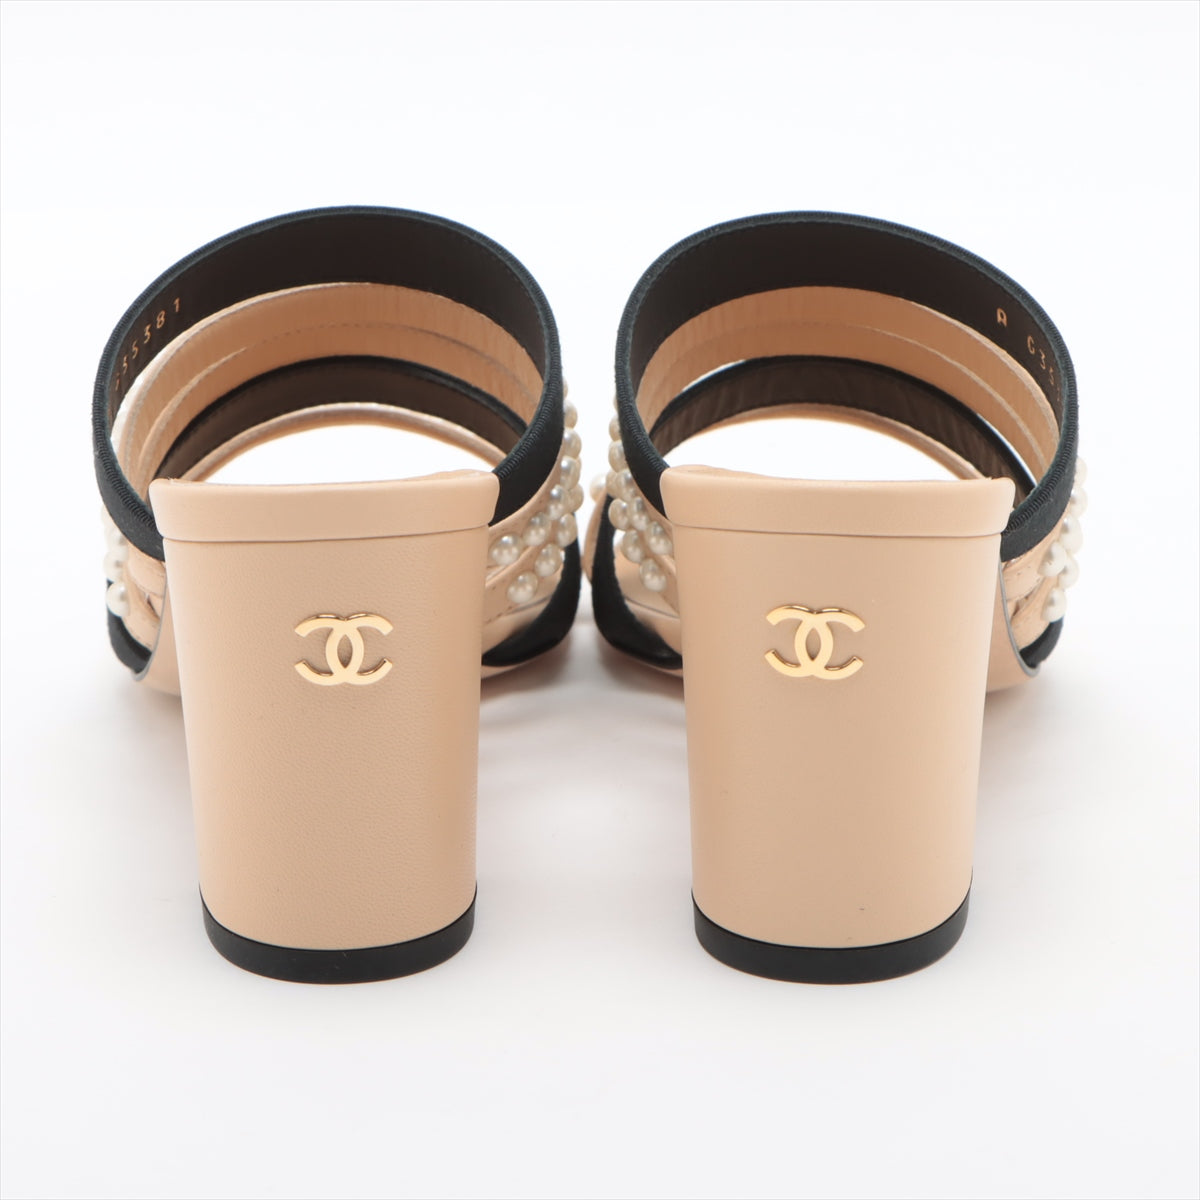 Chanel Coco Mark Leather x fabric Sandals 35C Ladies' Beige x black G35381 Pearl mule sandals There is a storage bag